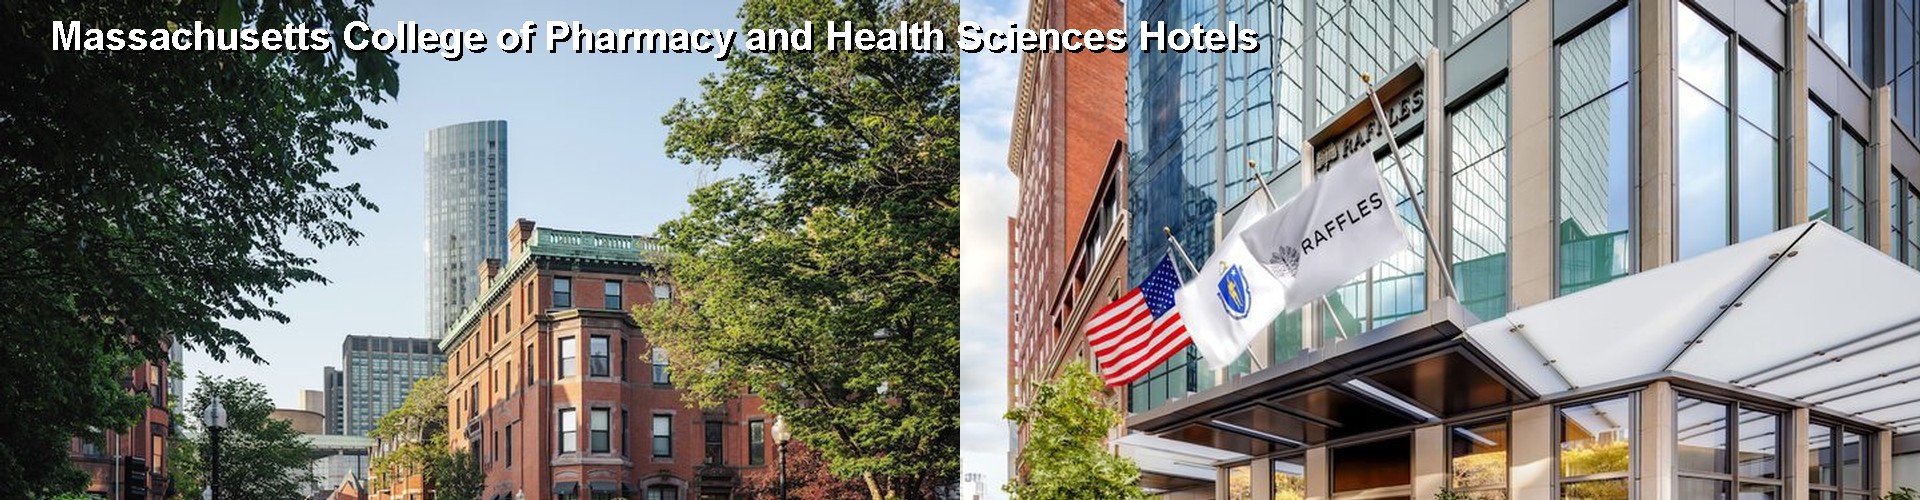 5 Best Hotels near Massachusetts College of Pharmacy and Health Sciences